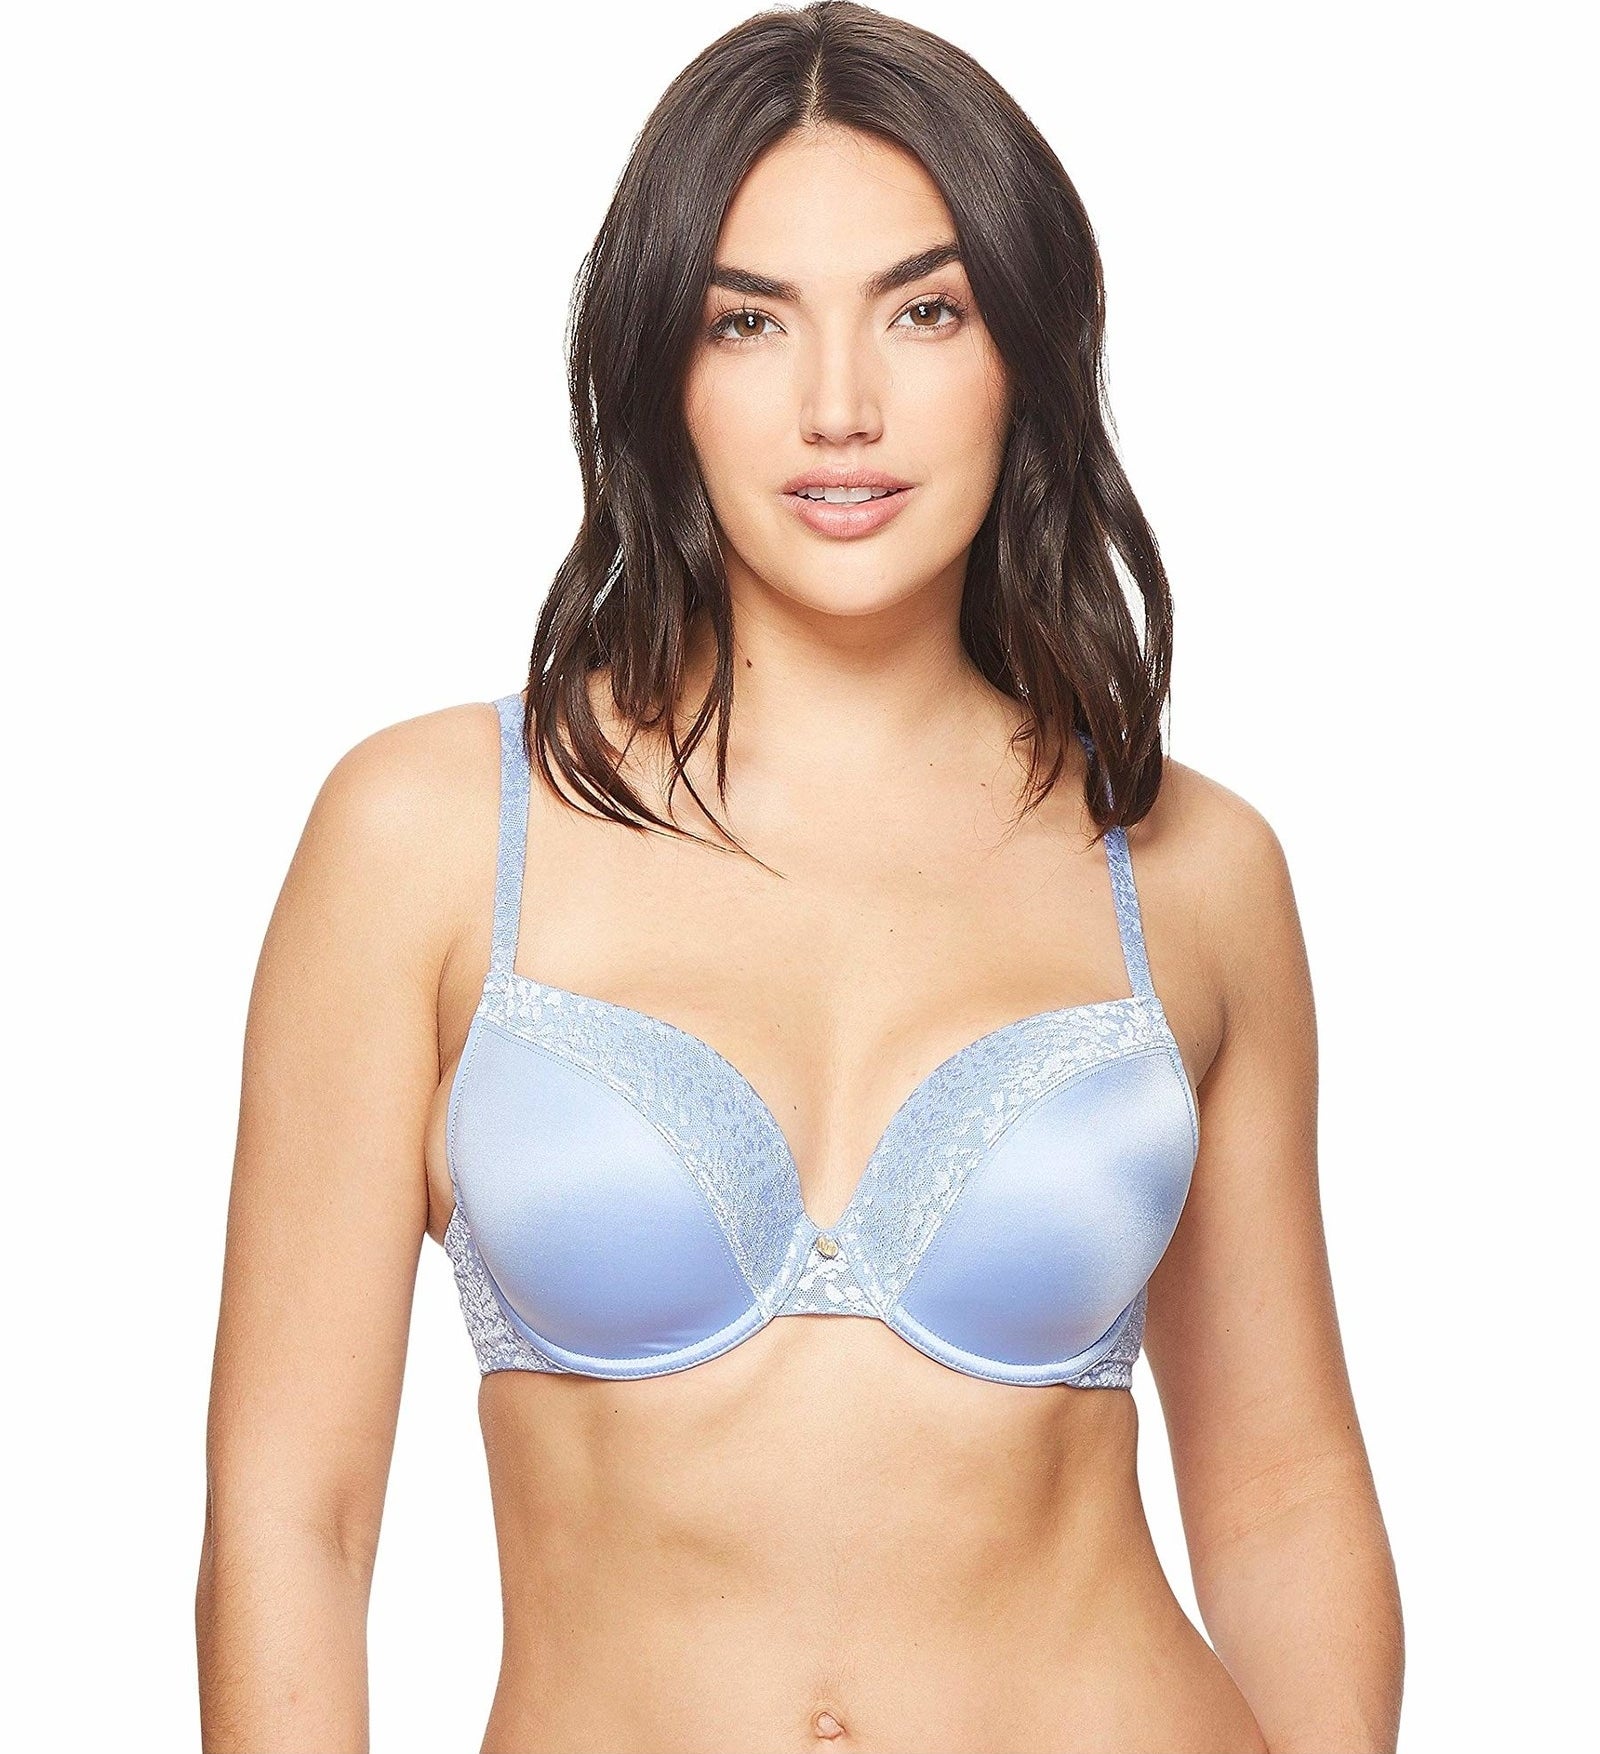 Embark on a journey of confidence and comfort with NewLook Brassiere Co.'s  stunning range of bras. Enjoy the essence of each style - from…